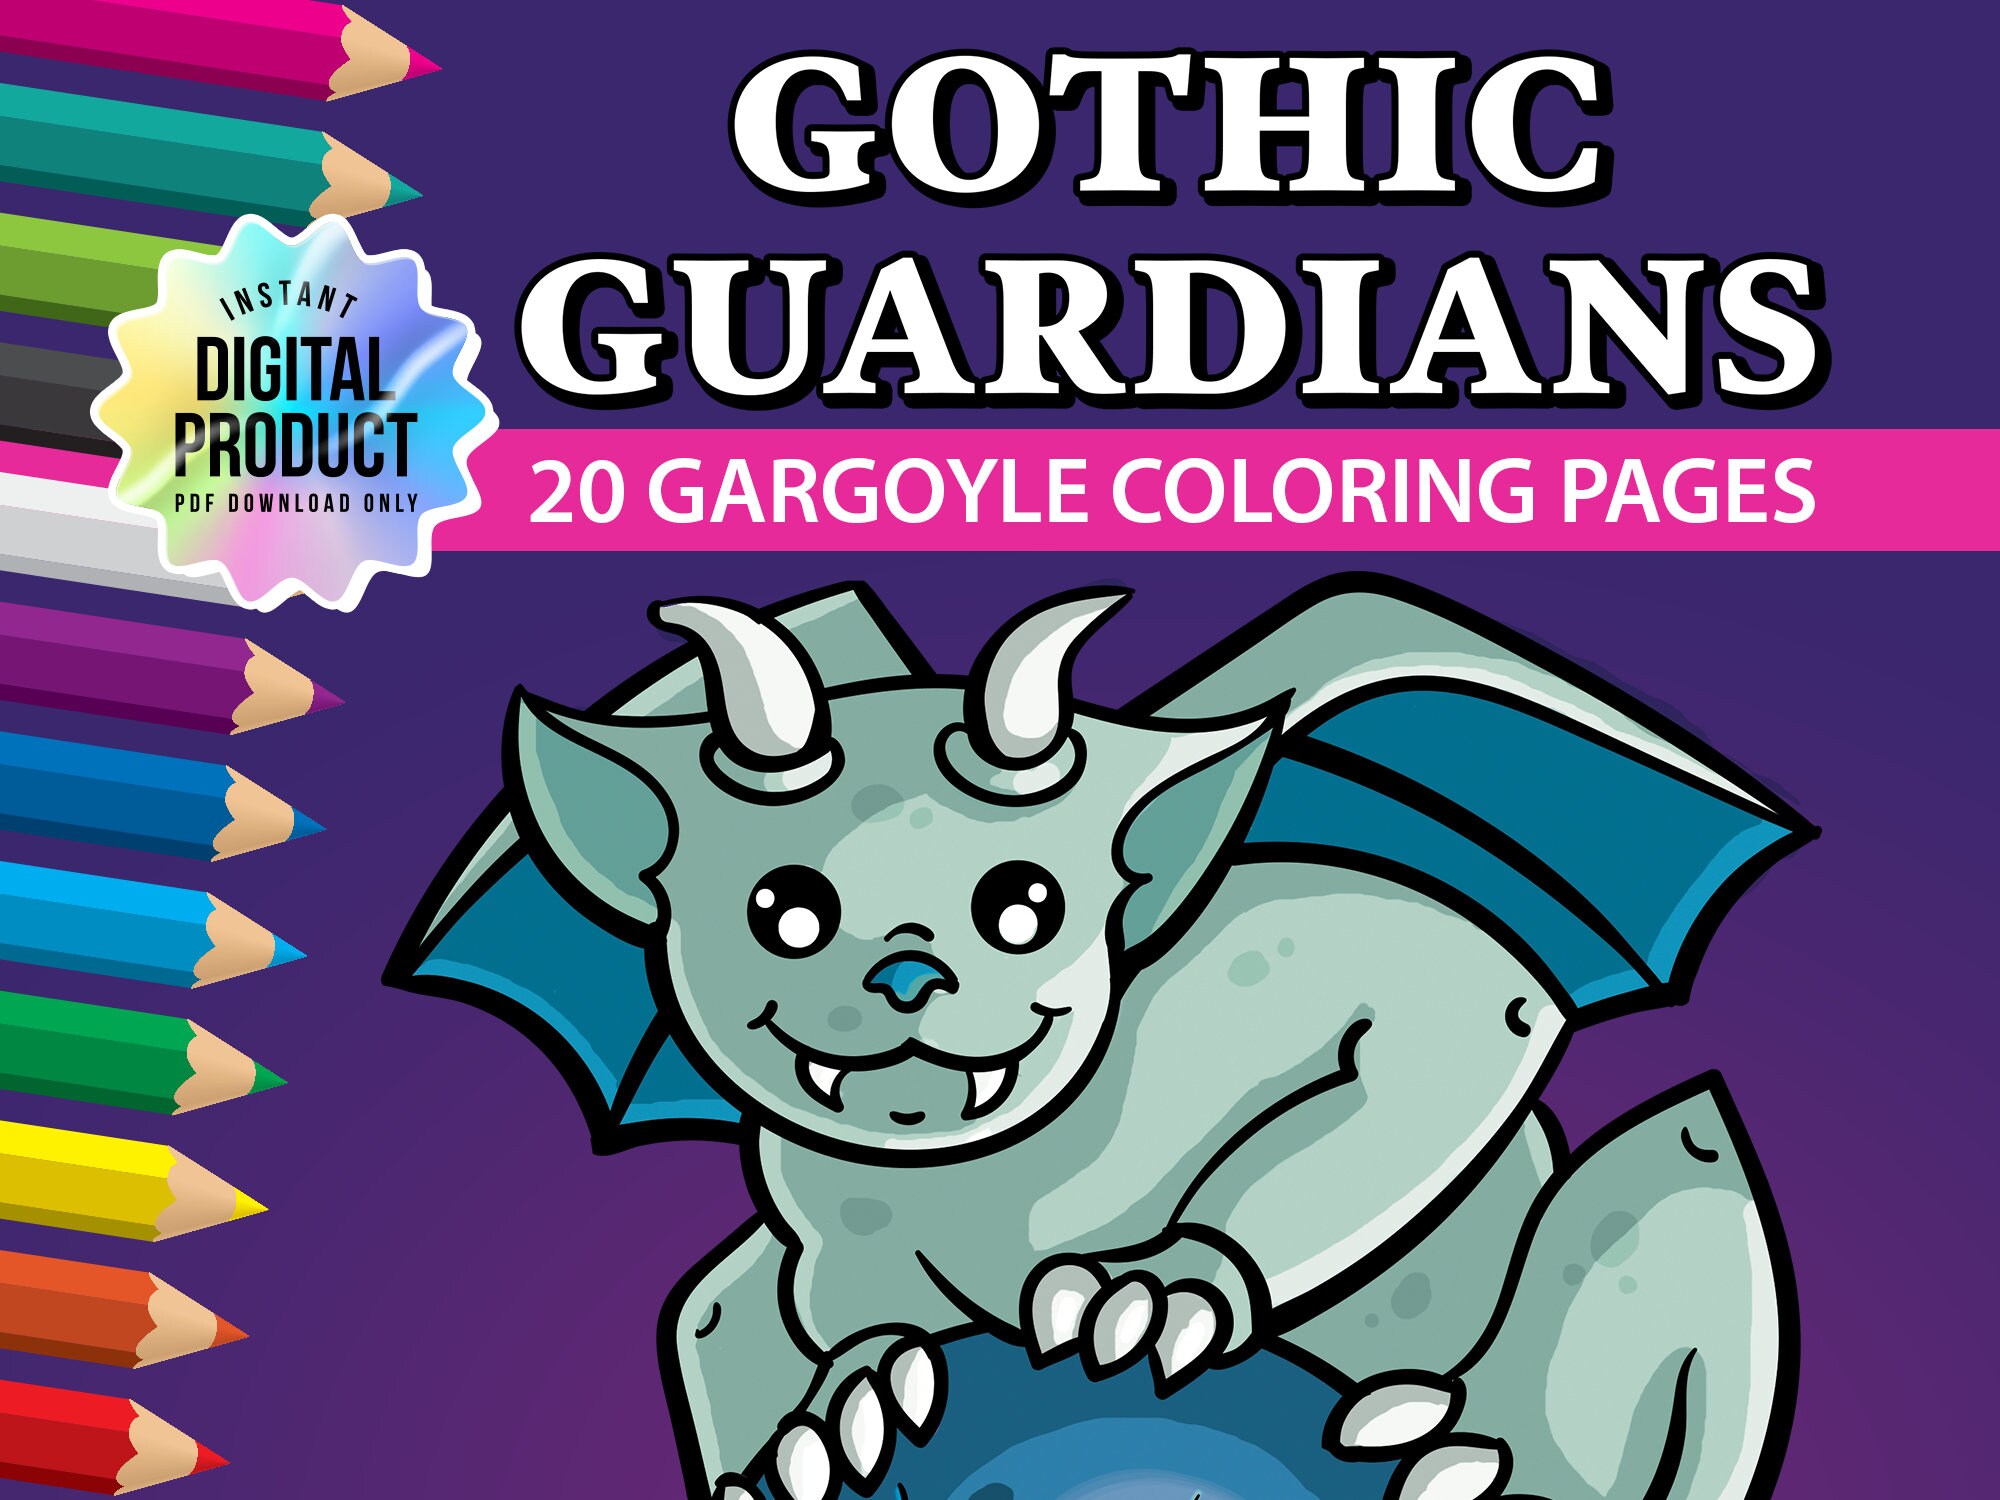 Gothic guardians gargoyle coloring pages